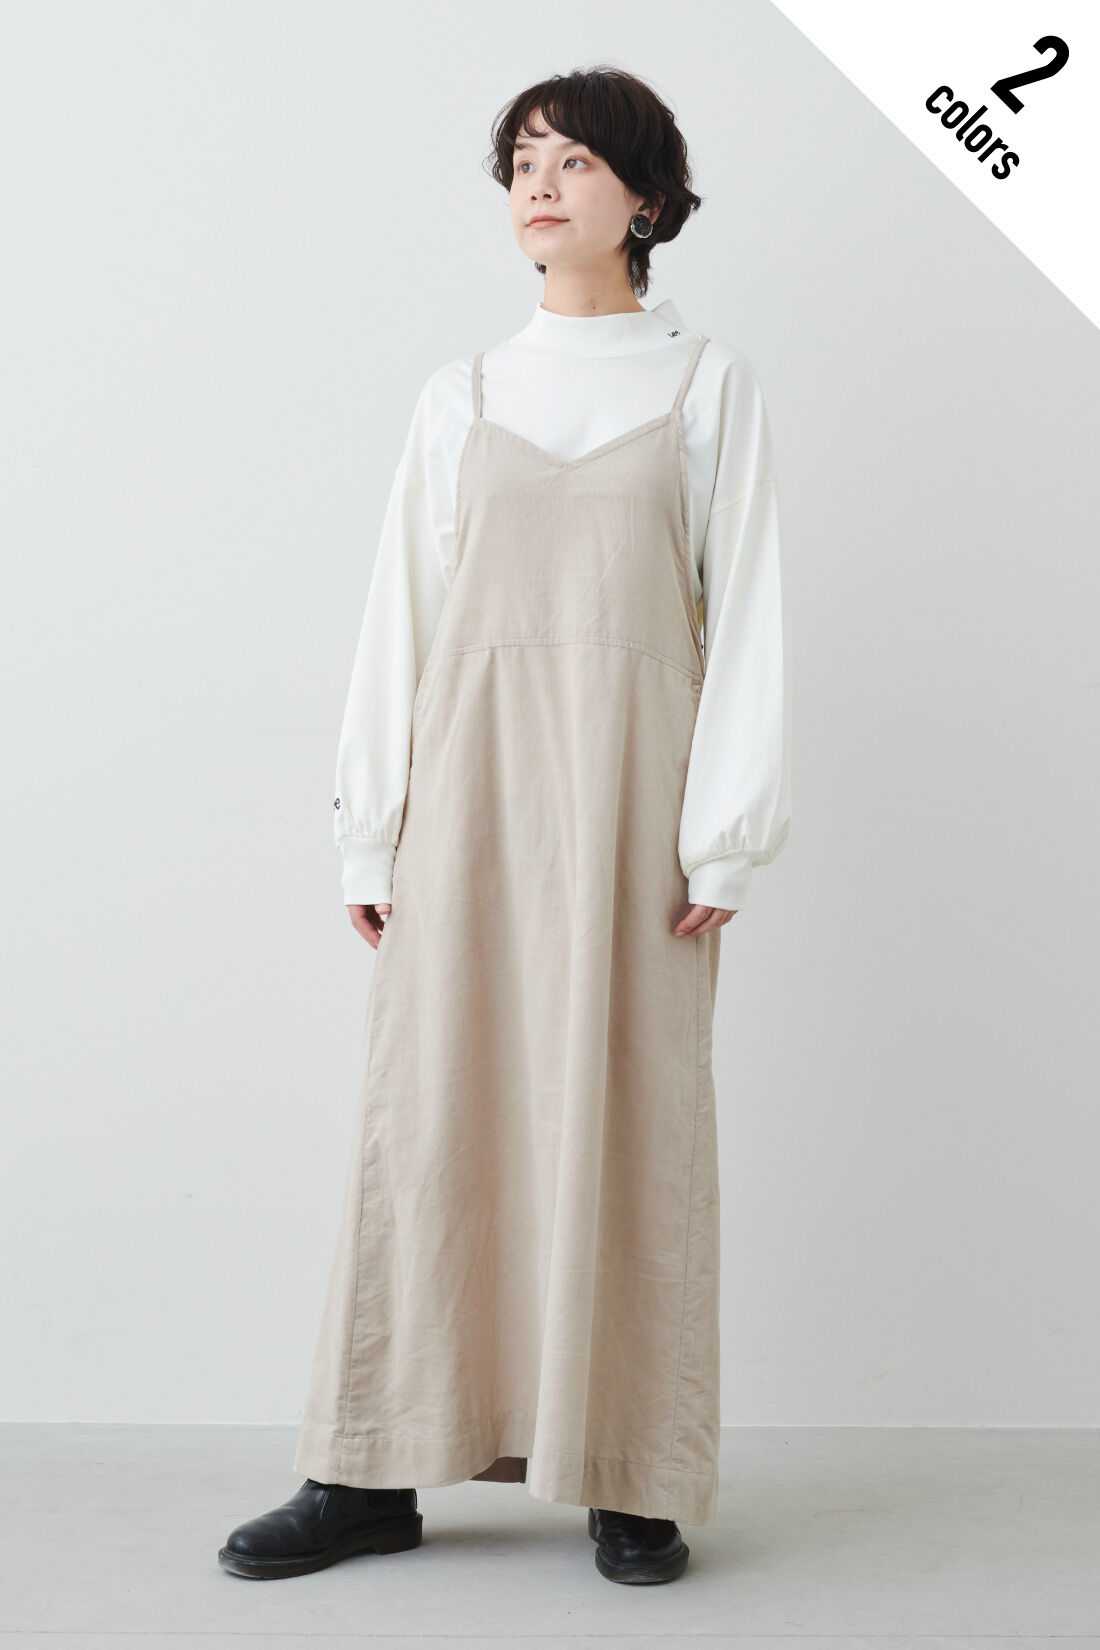 Real Stock|MEDE19F 〈SELECT〉 Lee LITE RELAX SALOPETTE SKIRT|1：ベージュ　モデル身長：157cm